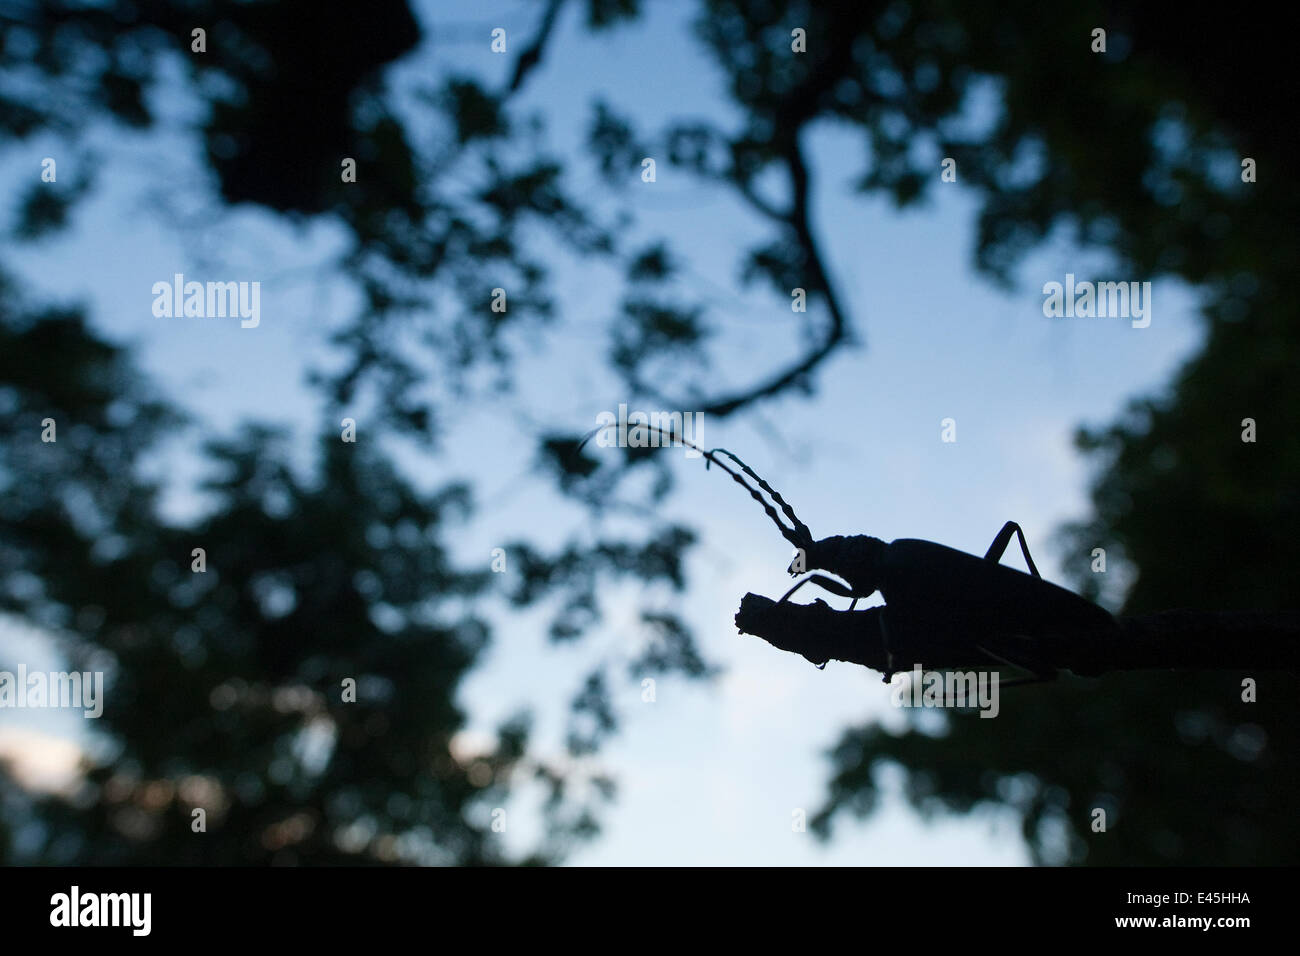 Tanner / Sawyer beetle (Prionus coriarius) silhouetted on branch at dusk, Djerdab National Park, Serbia, June 2009 Stock Photo